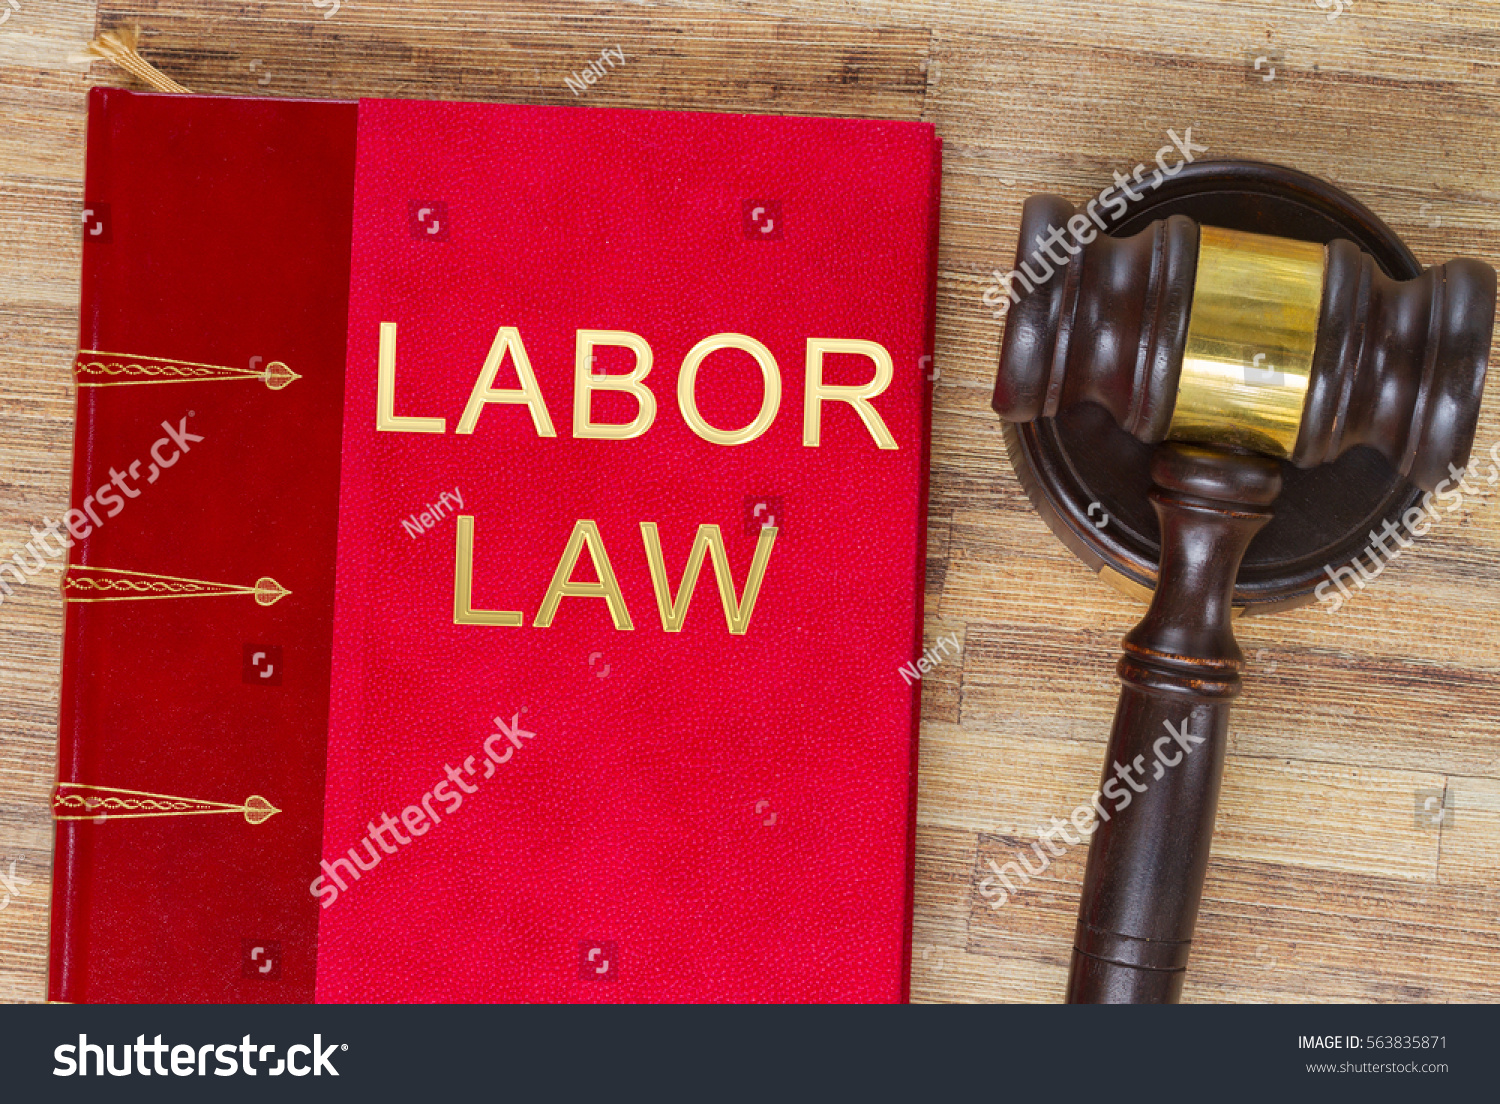 labor-law-book-with-gavel